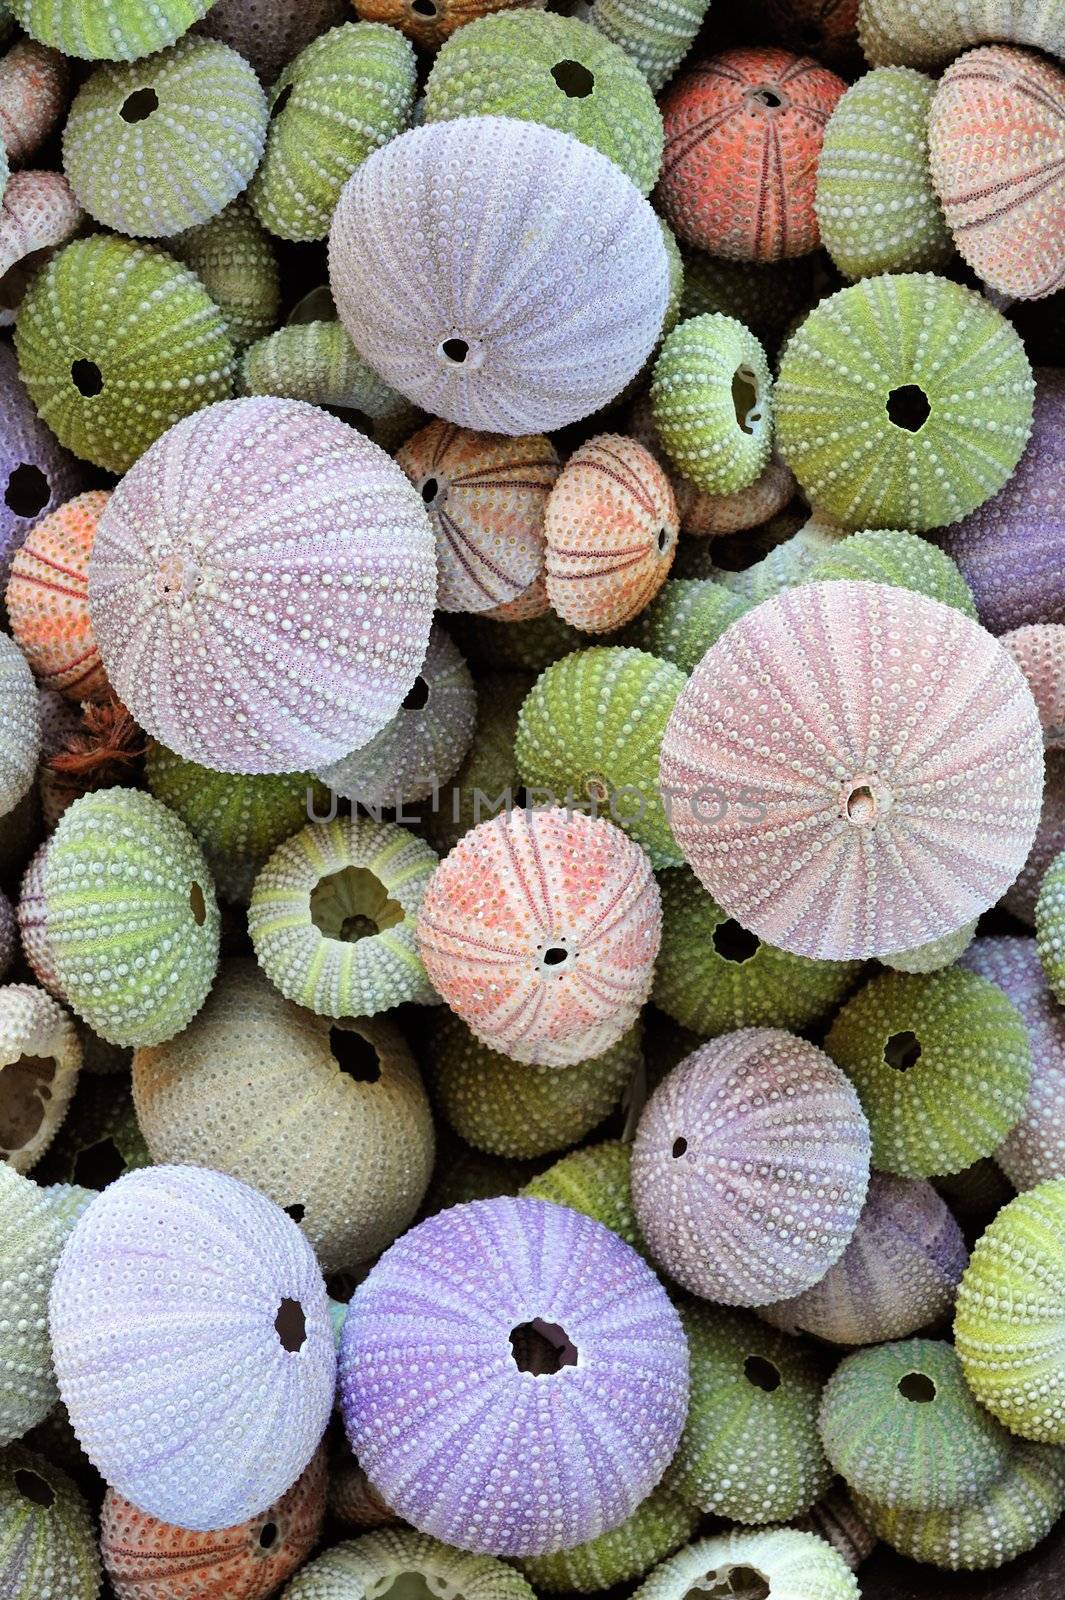 Collection of colorful sea urchin shells by akarelias